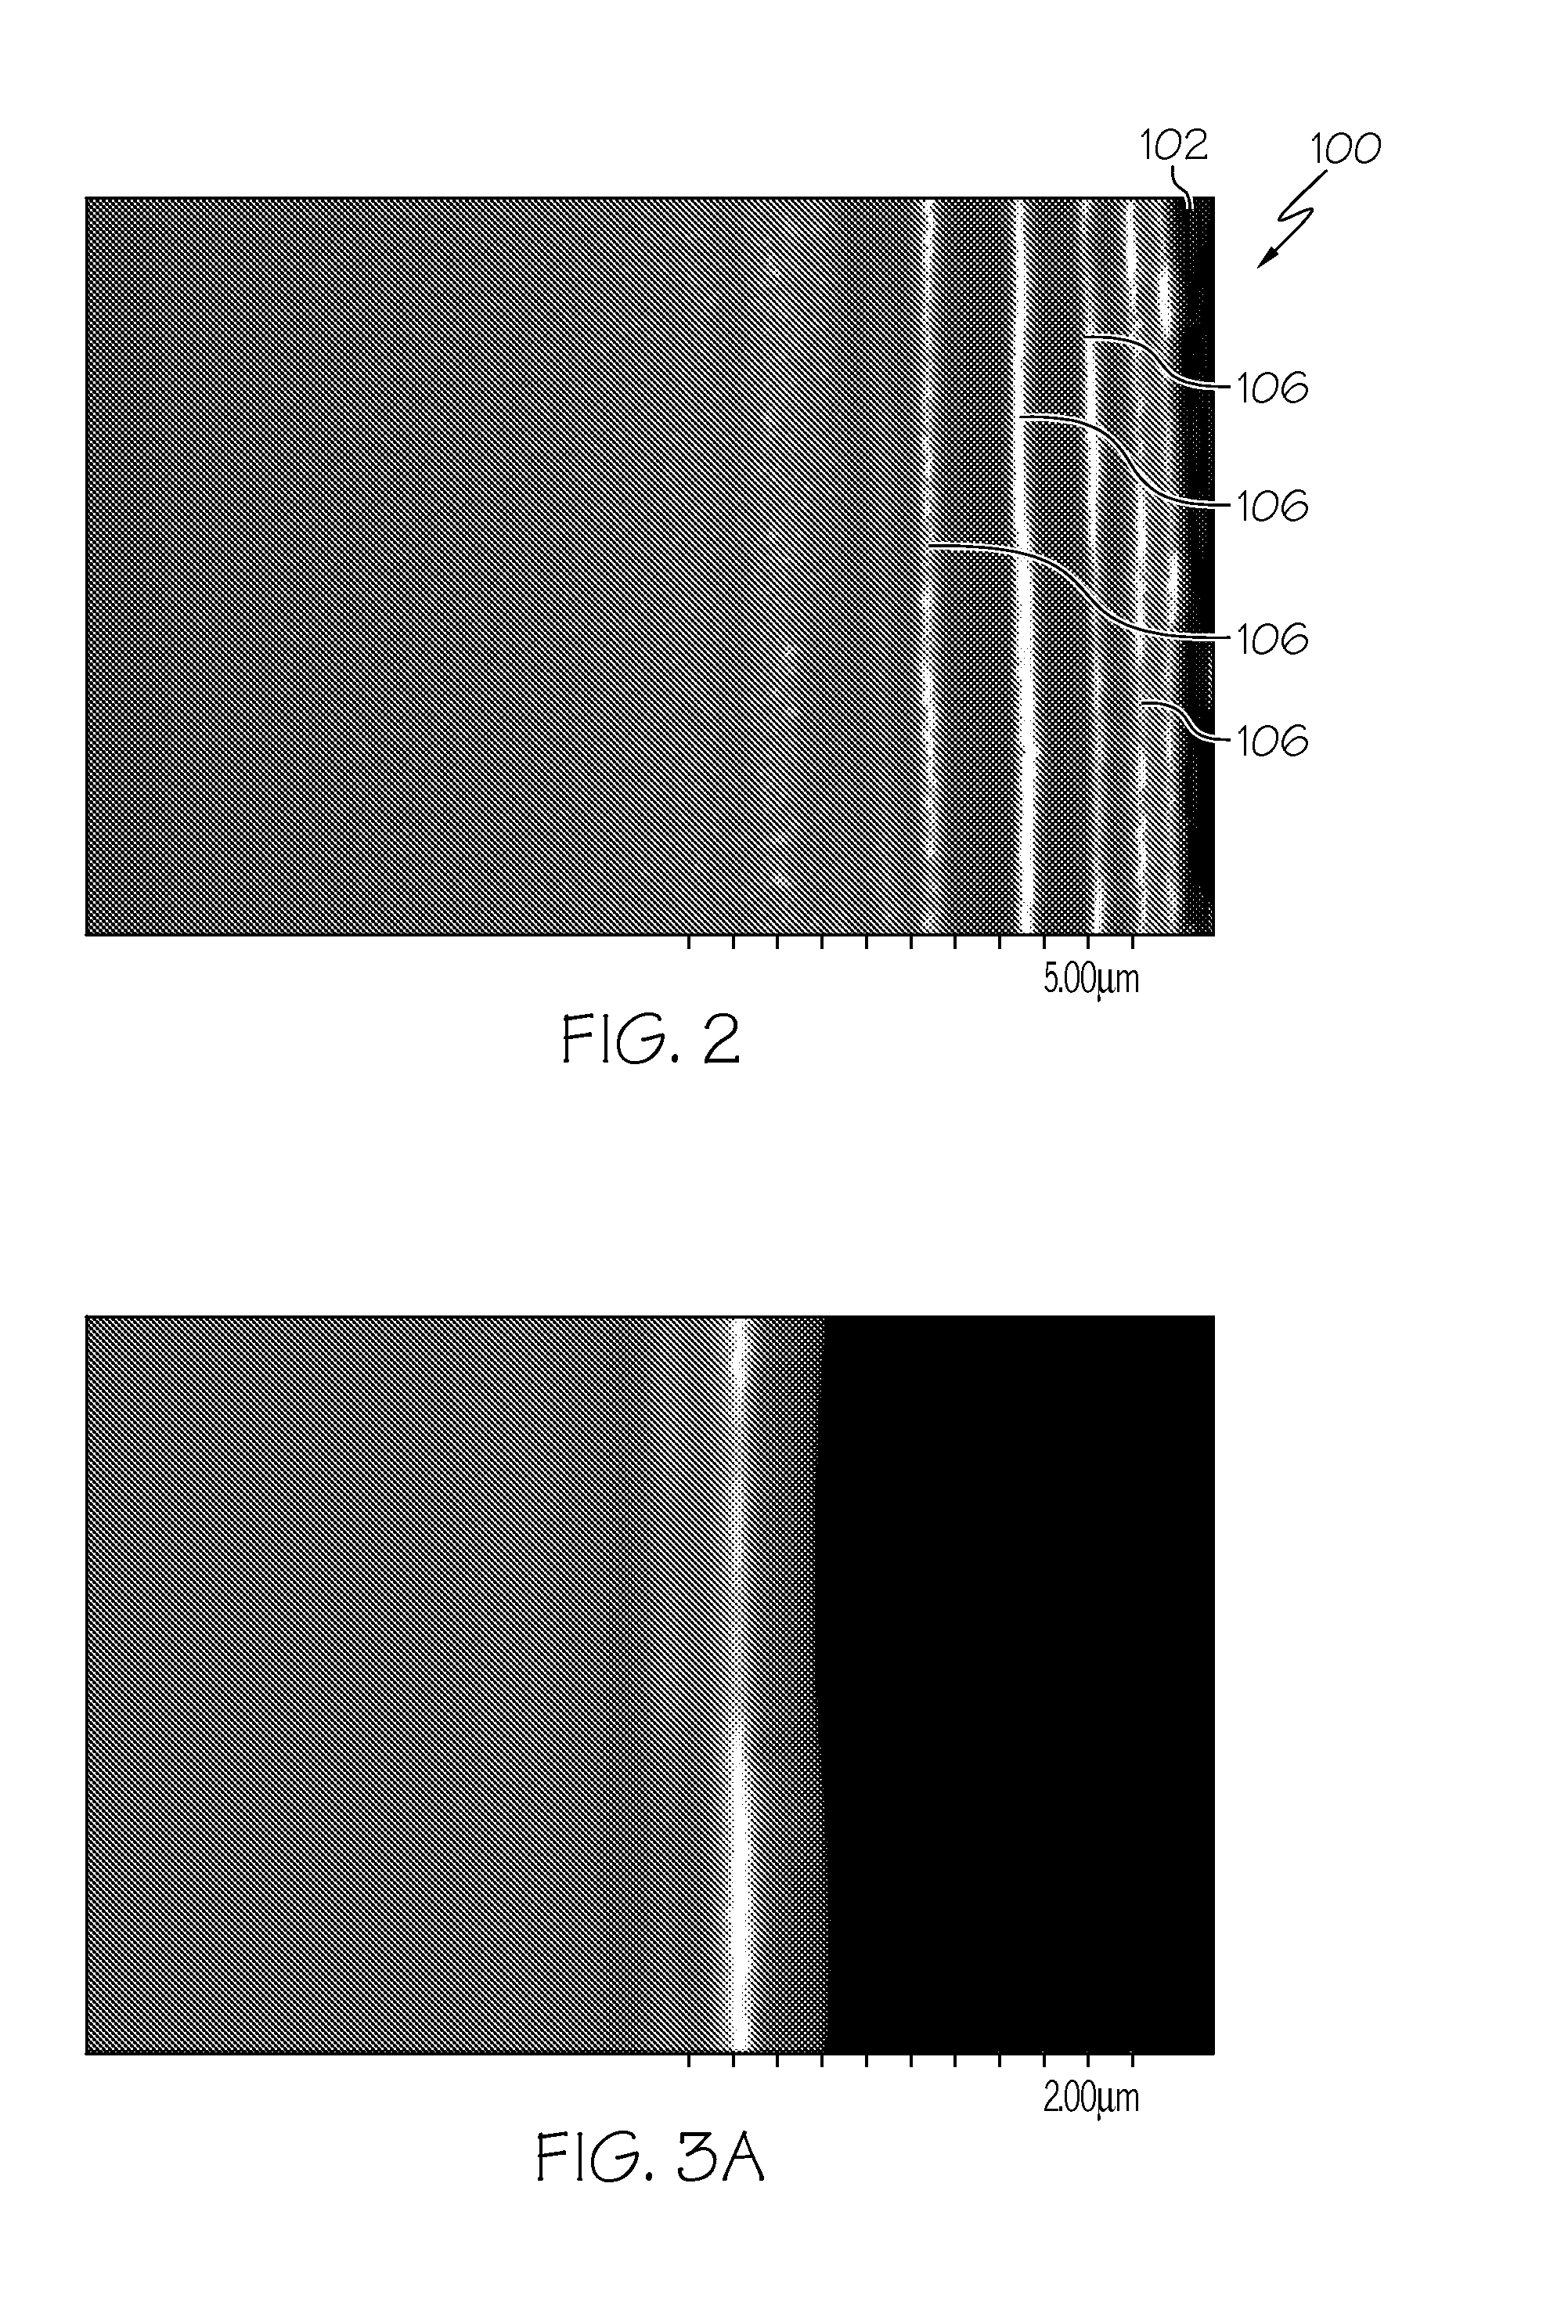 Glass articles with infrared reflectivity and methods for making the same